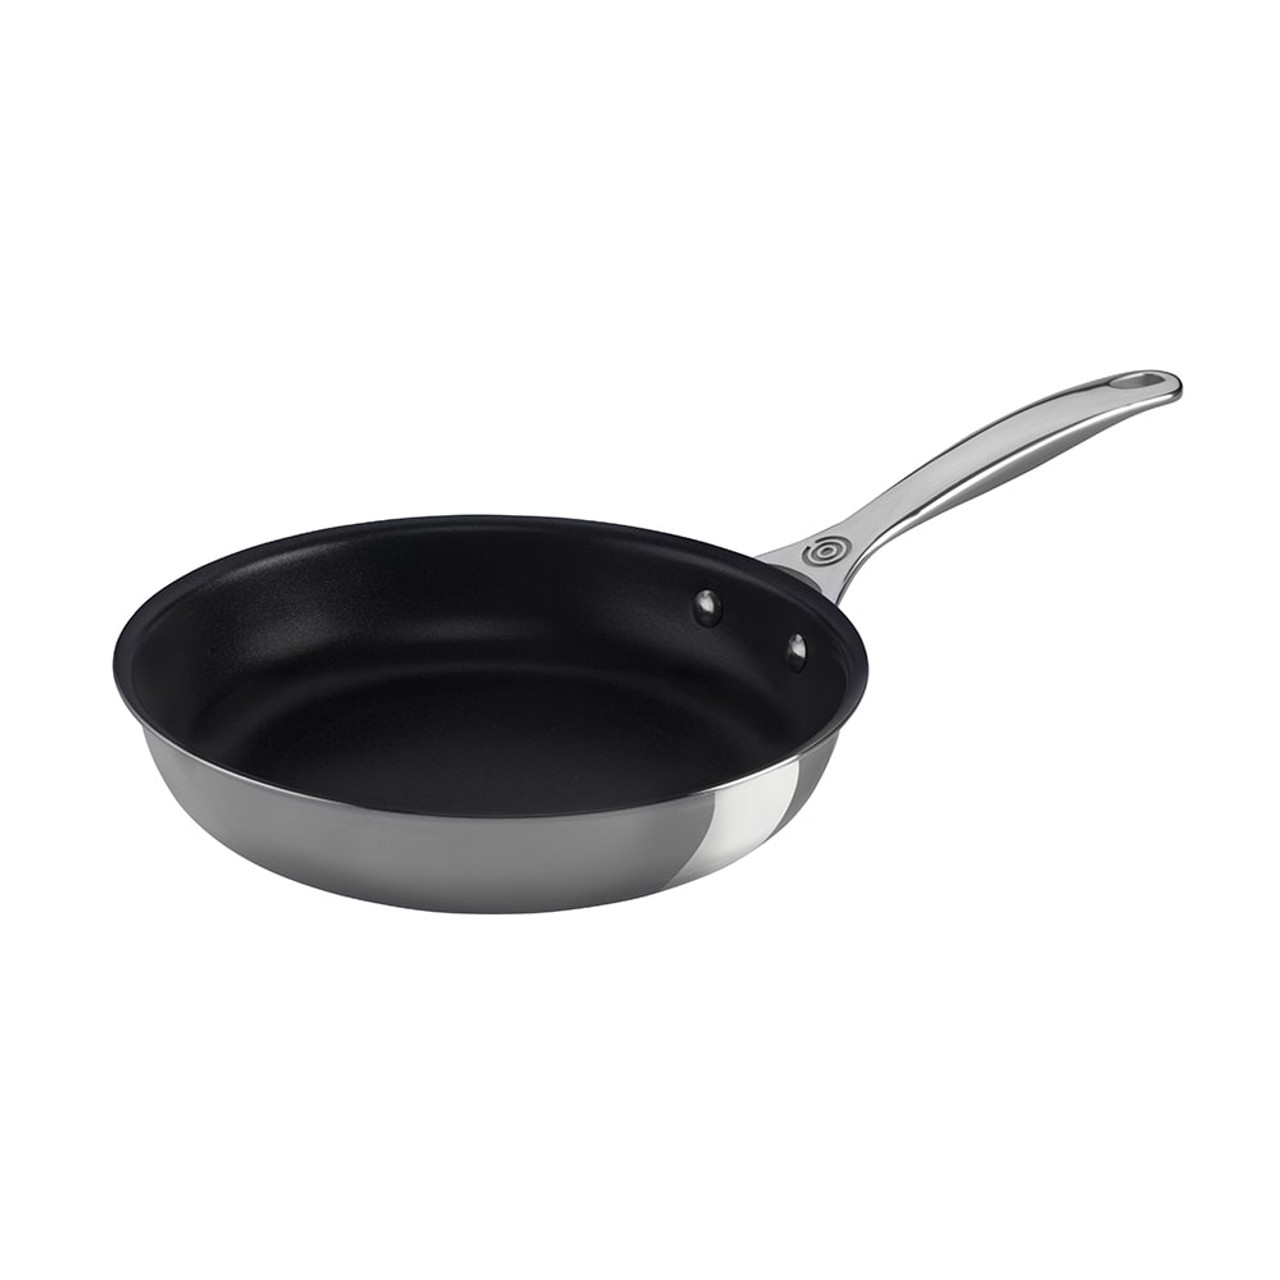 9-inch Non-stick Stainless Steel Fry Pan